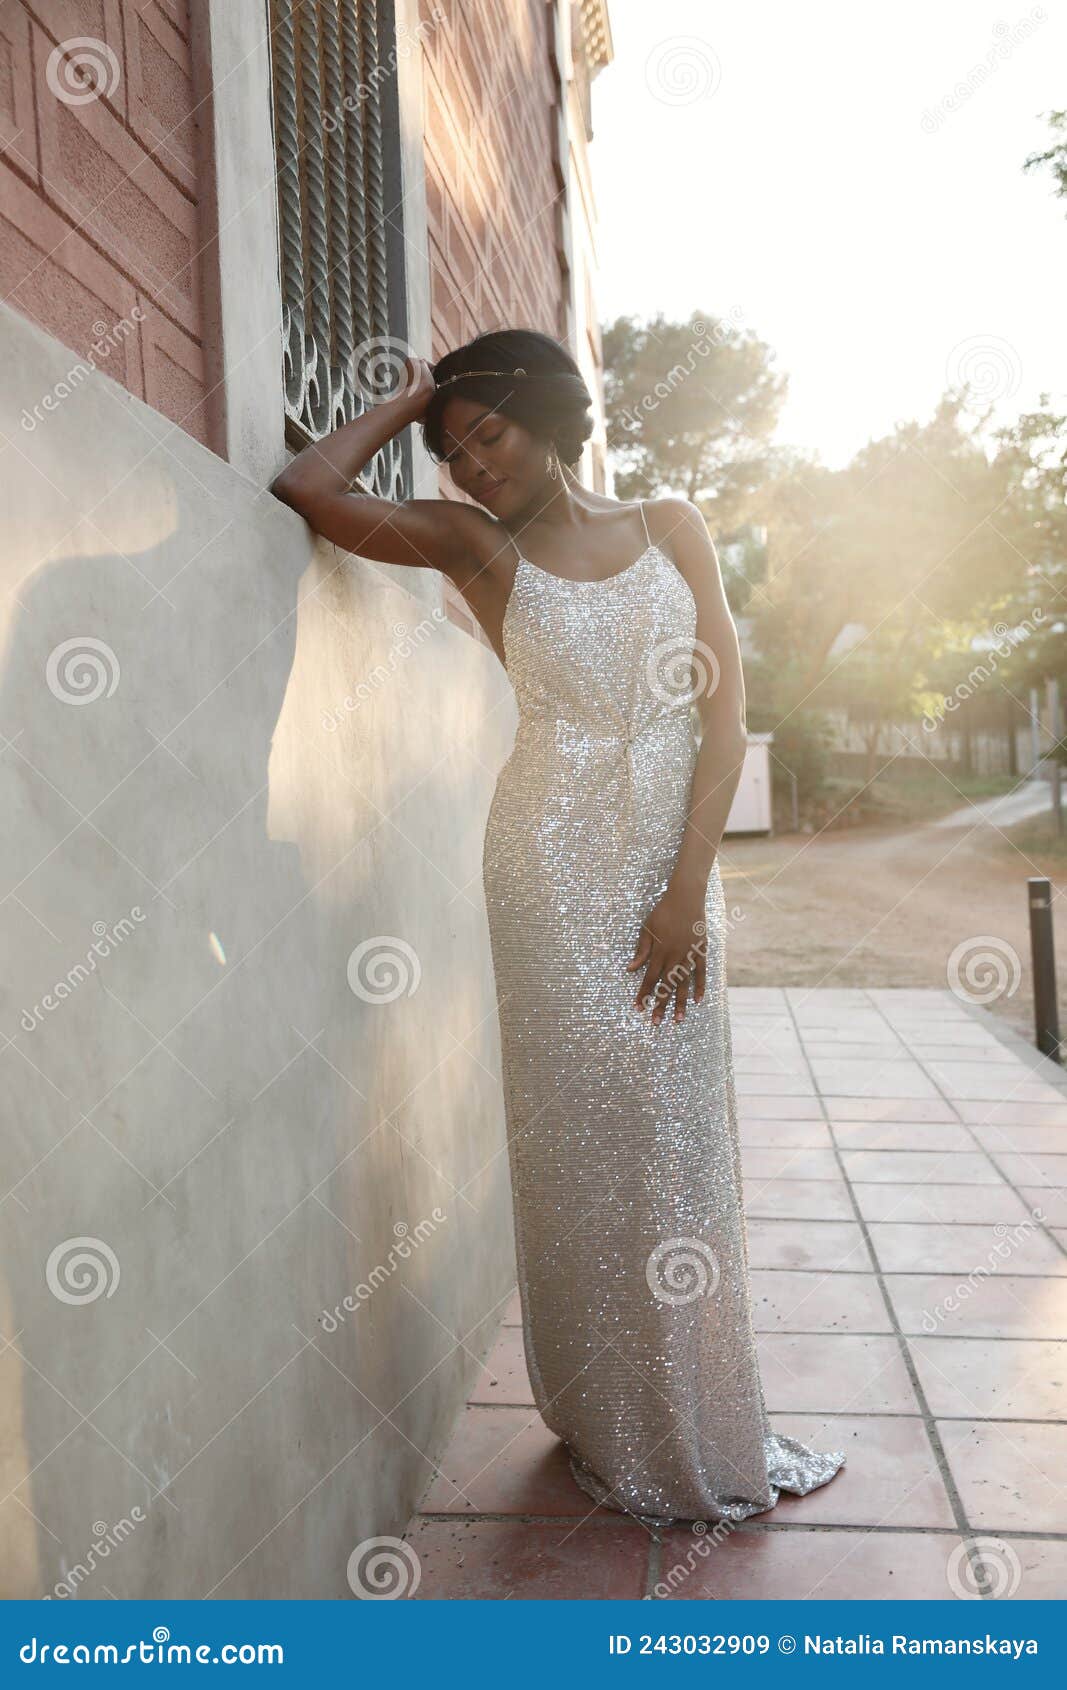 Sequin dress Images - Search Images on Everypixel